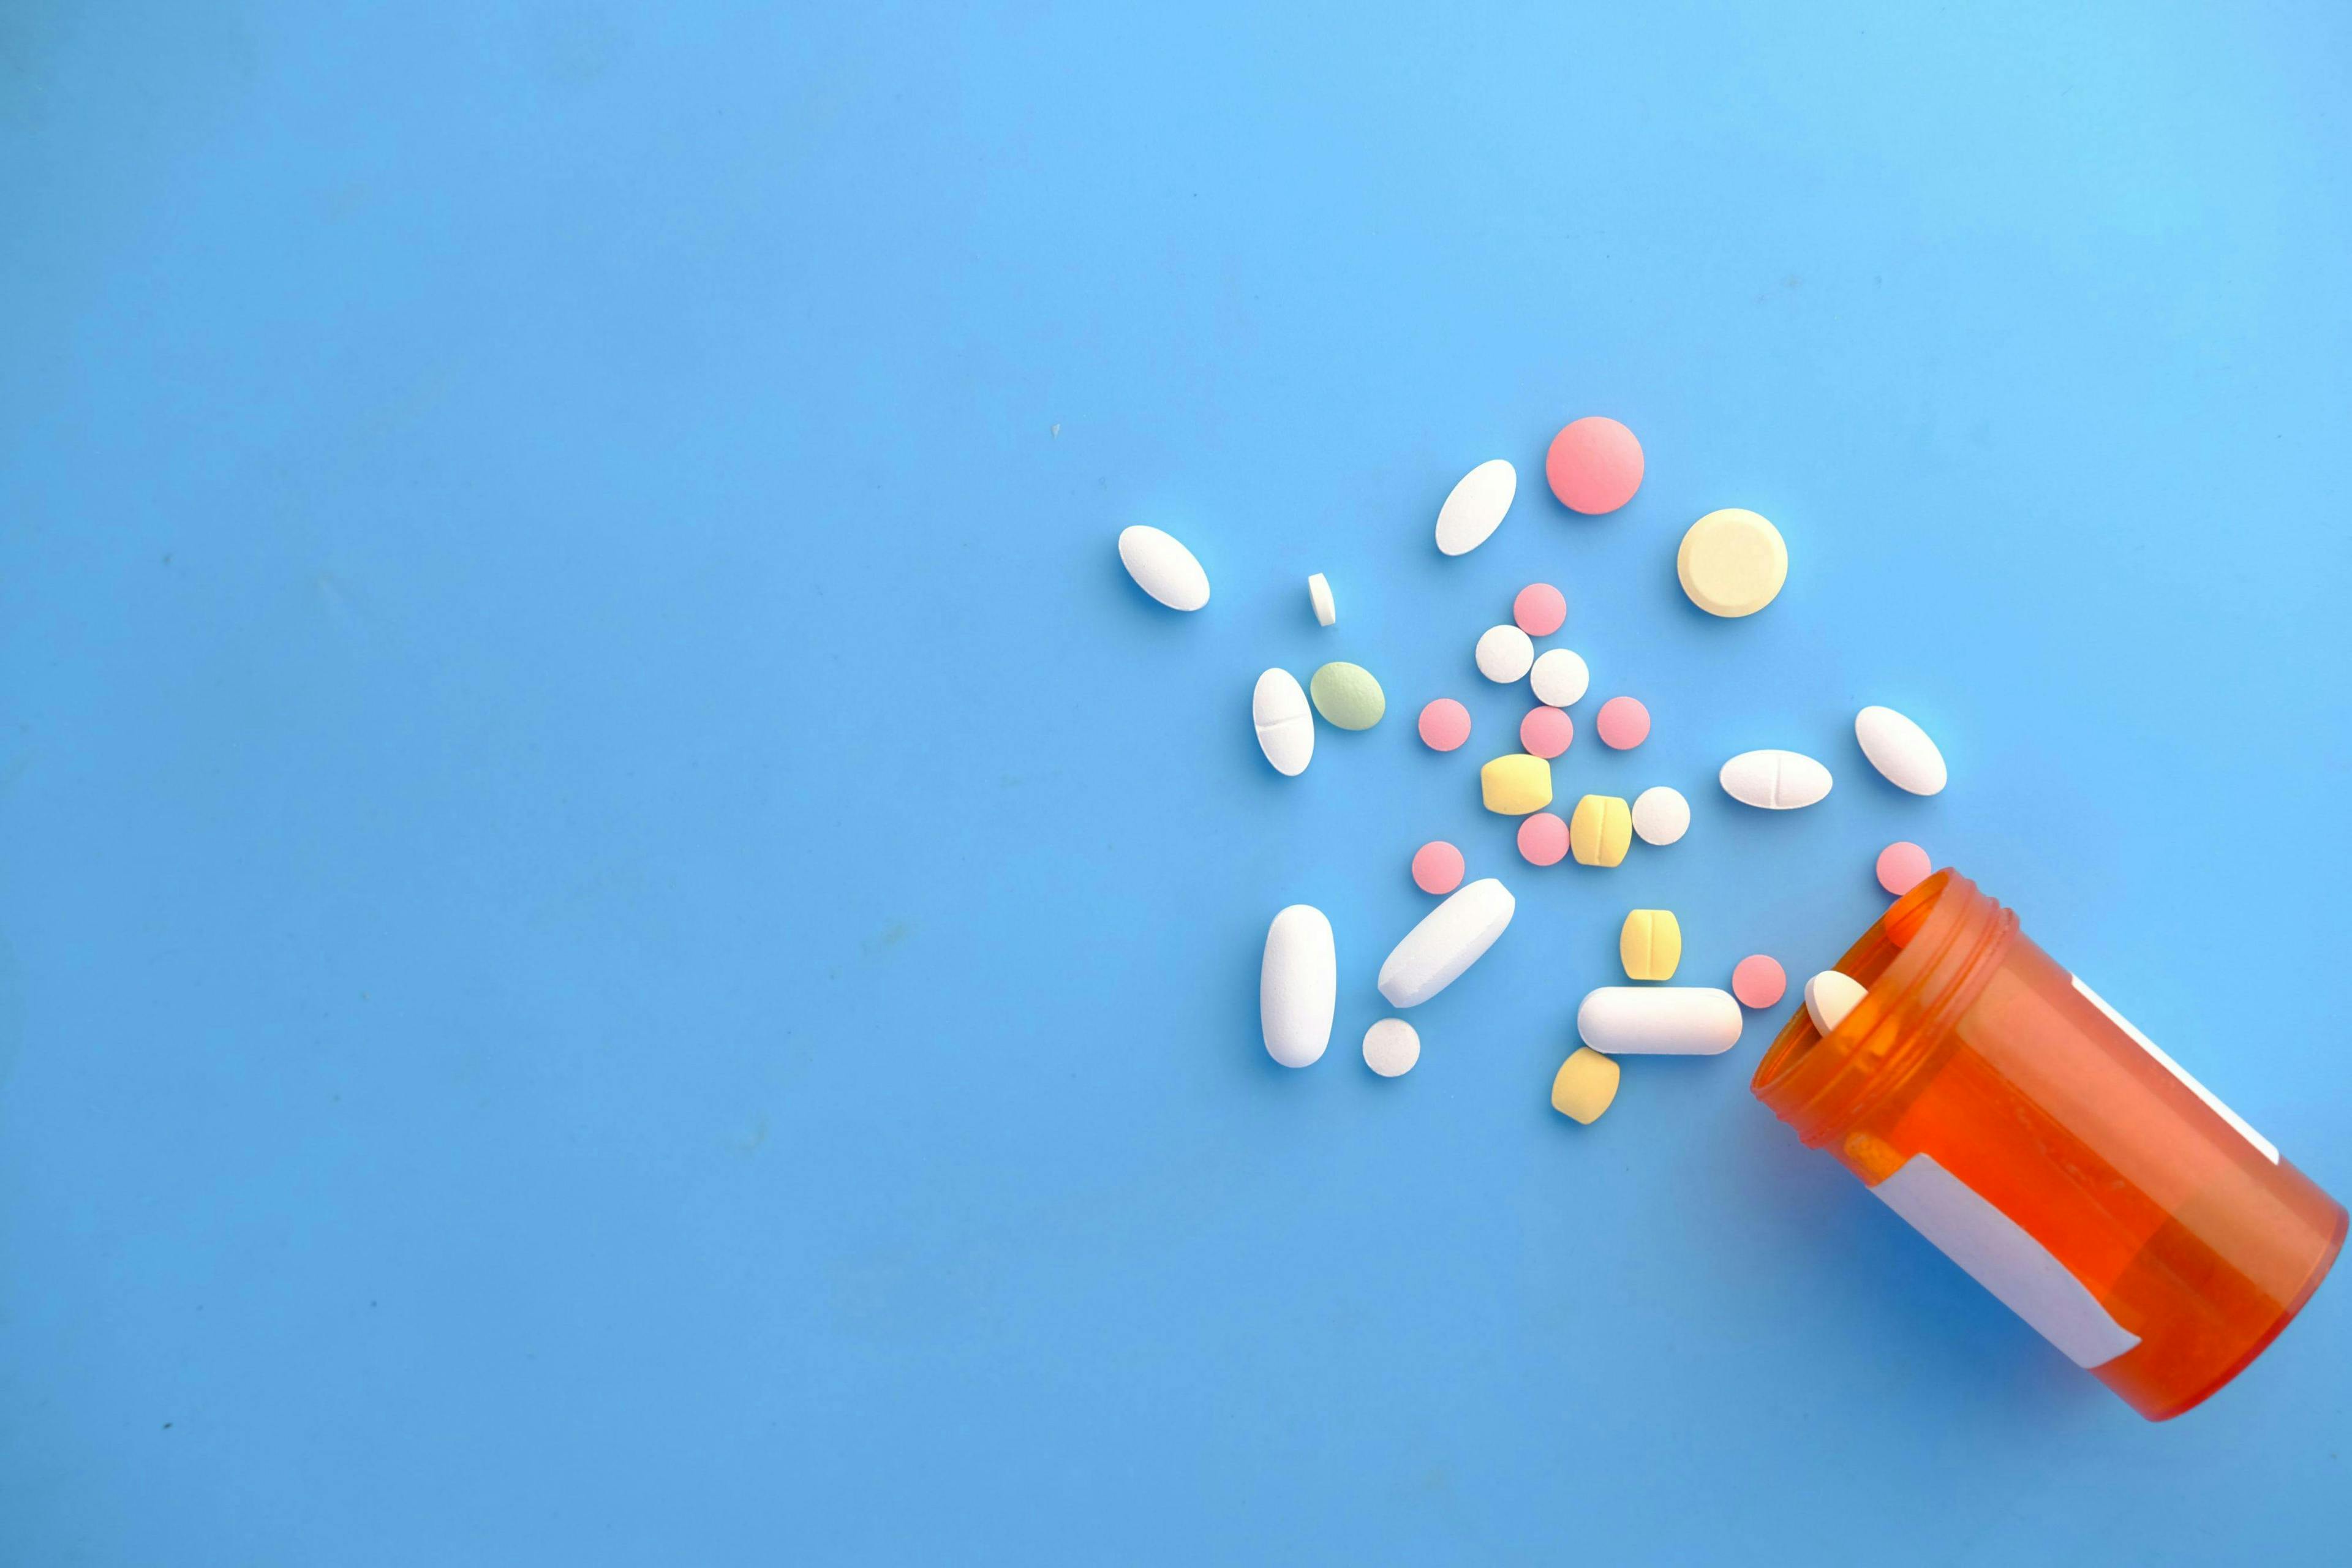 An orange prescription bottle spills variously shaped and colored pills across a blue surface, creating a scattered arrangement.